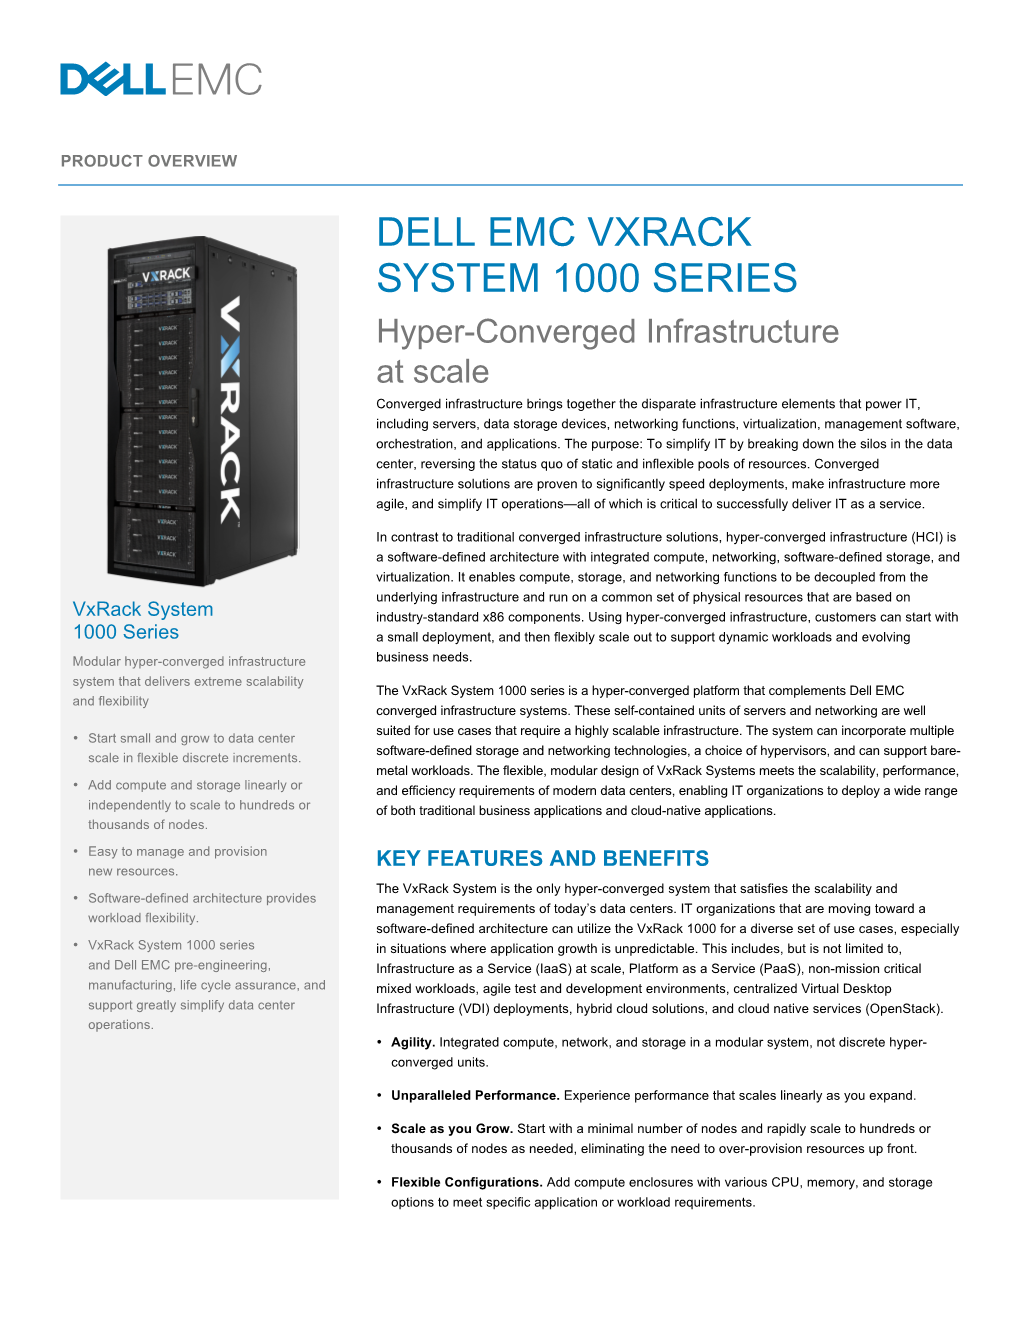 Vxrack-1000-Overview.Pdf